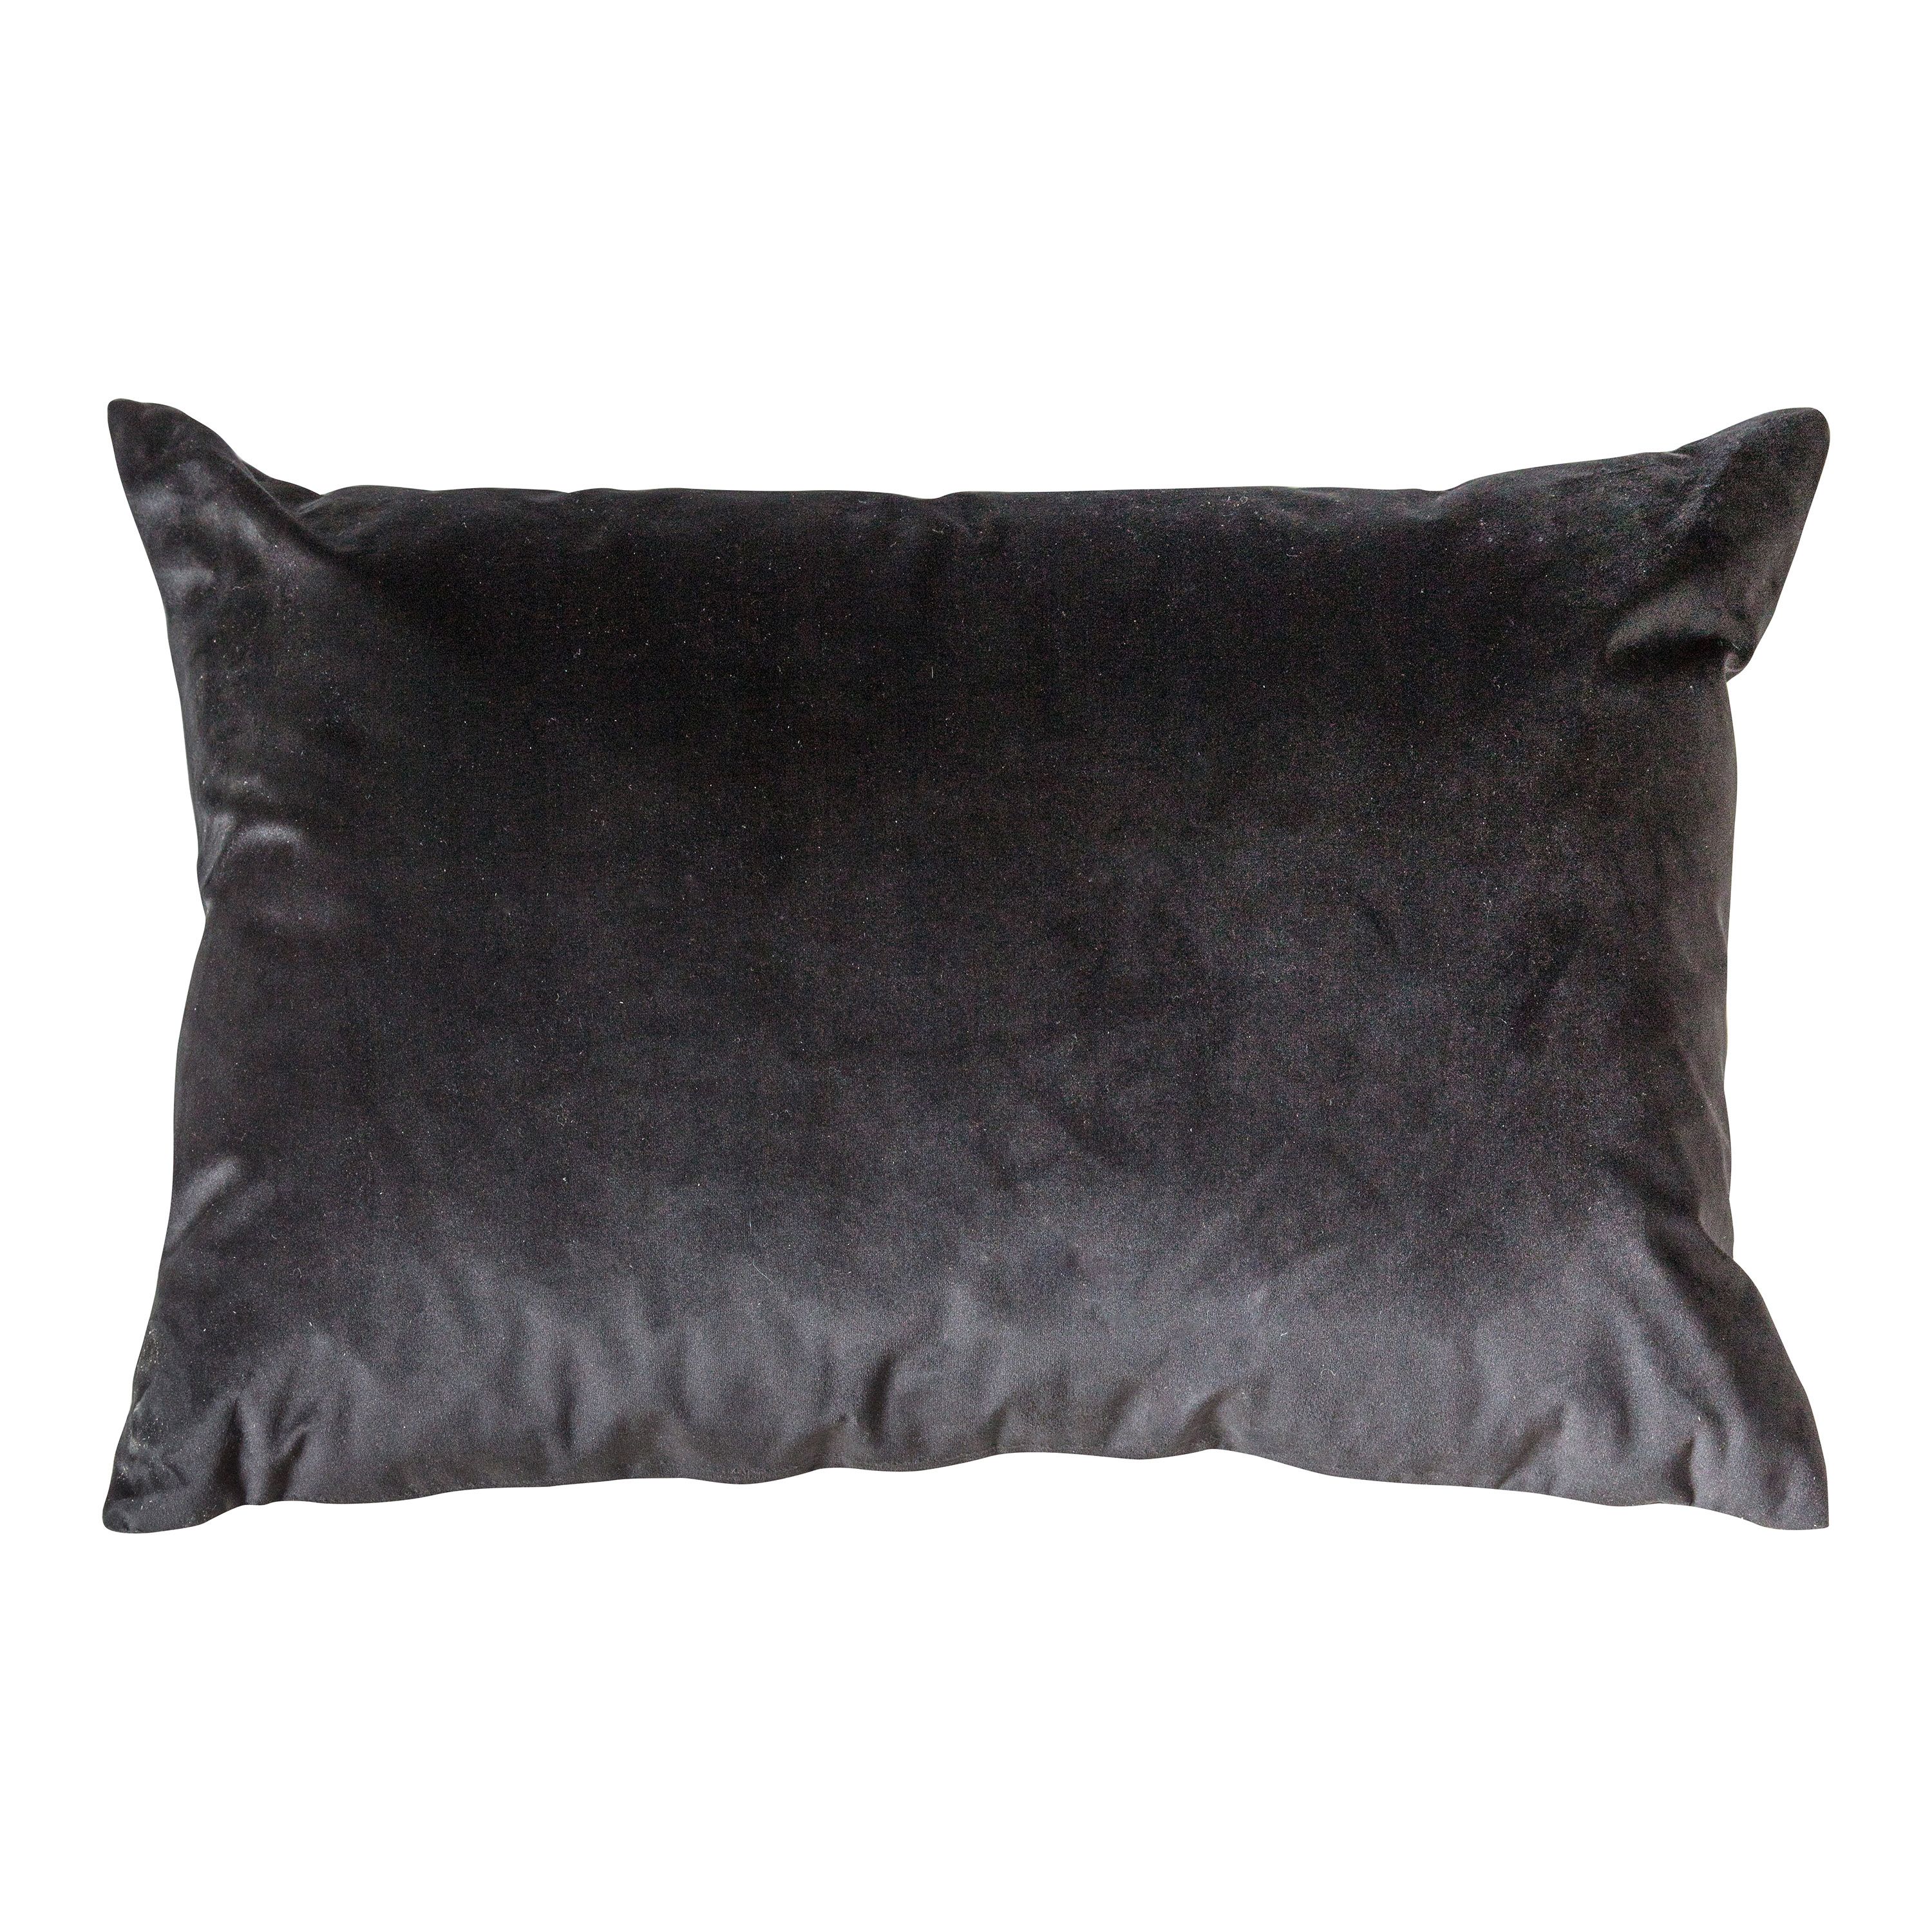 Neutral Abstract Cushion - Outlet - Save 20%